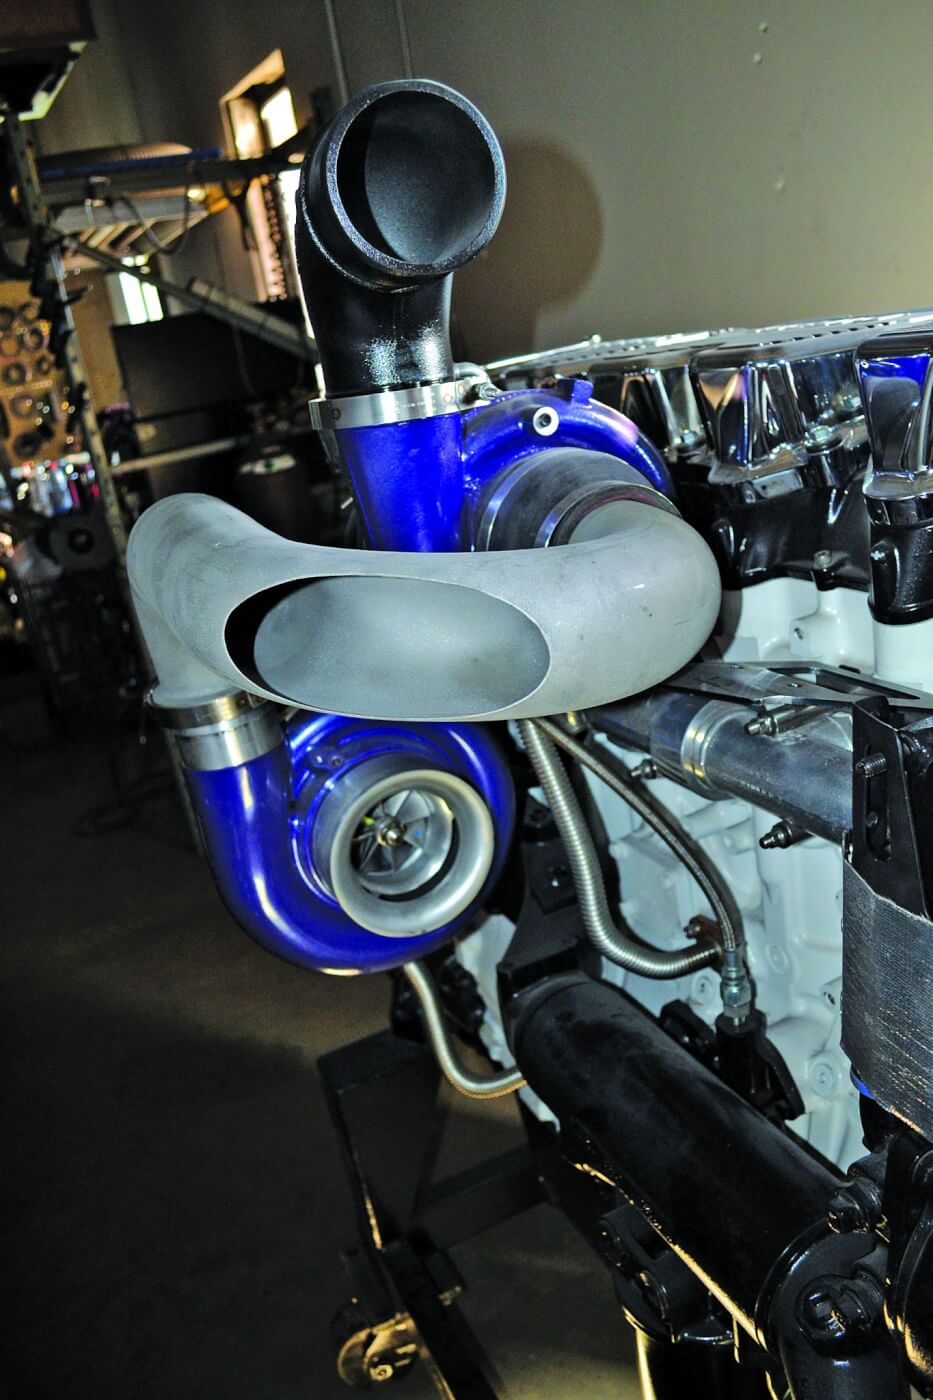 Check out this cool compound turbo setup that's being developed for a large CAT engine.